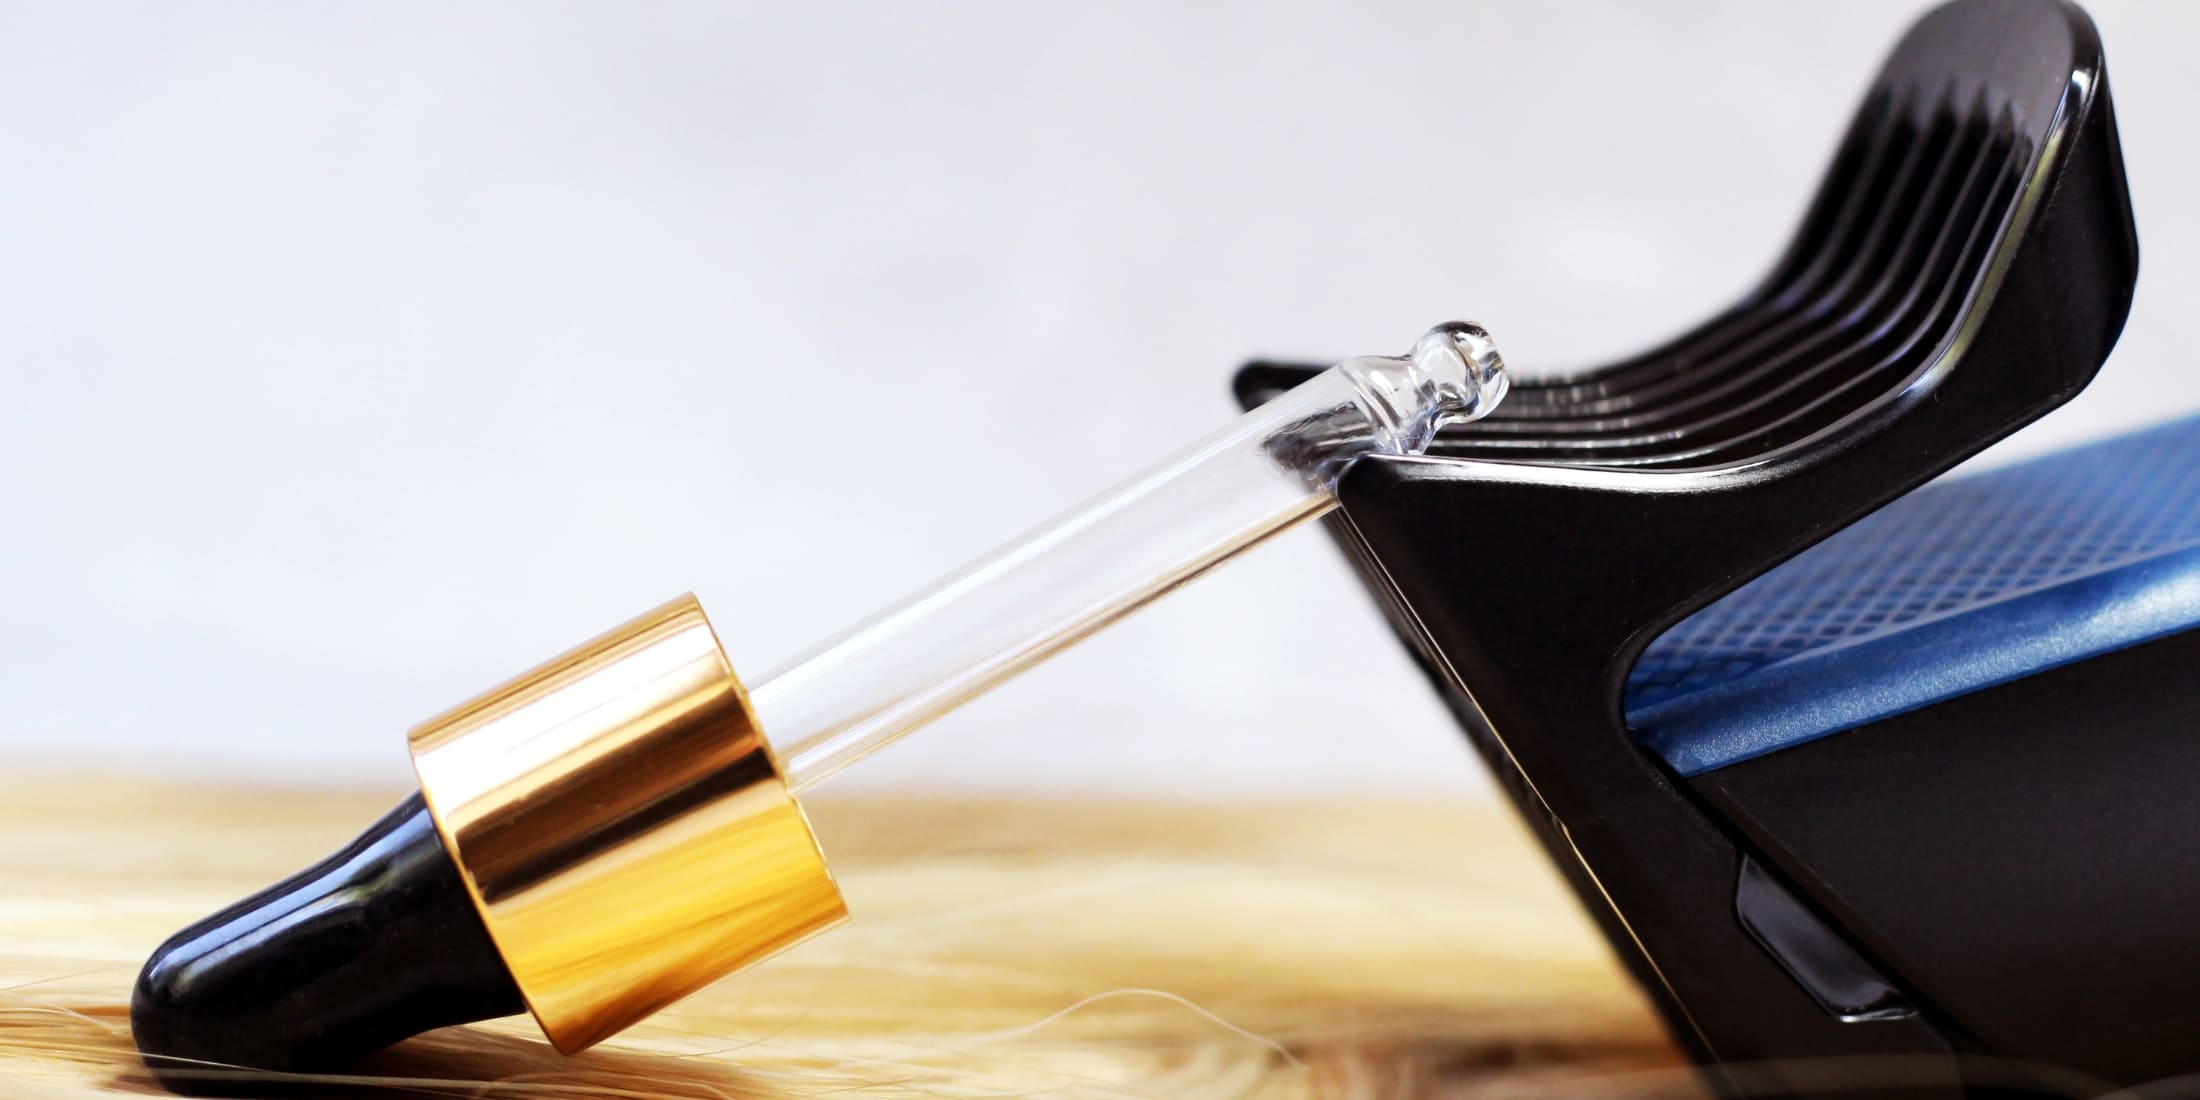 A dropper bottle of clear lubricant, an hair clipper oil alternative to traditional hair clipper oil, resting on its side against a modern black and blue hair clipper, surrounded by strands of light-colored hair on a wooden surface, illustrating hair maintenance and grooming tools.